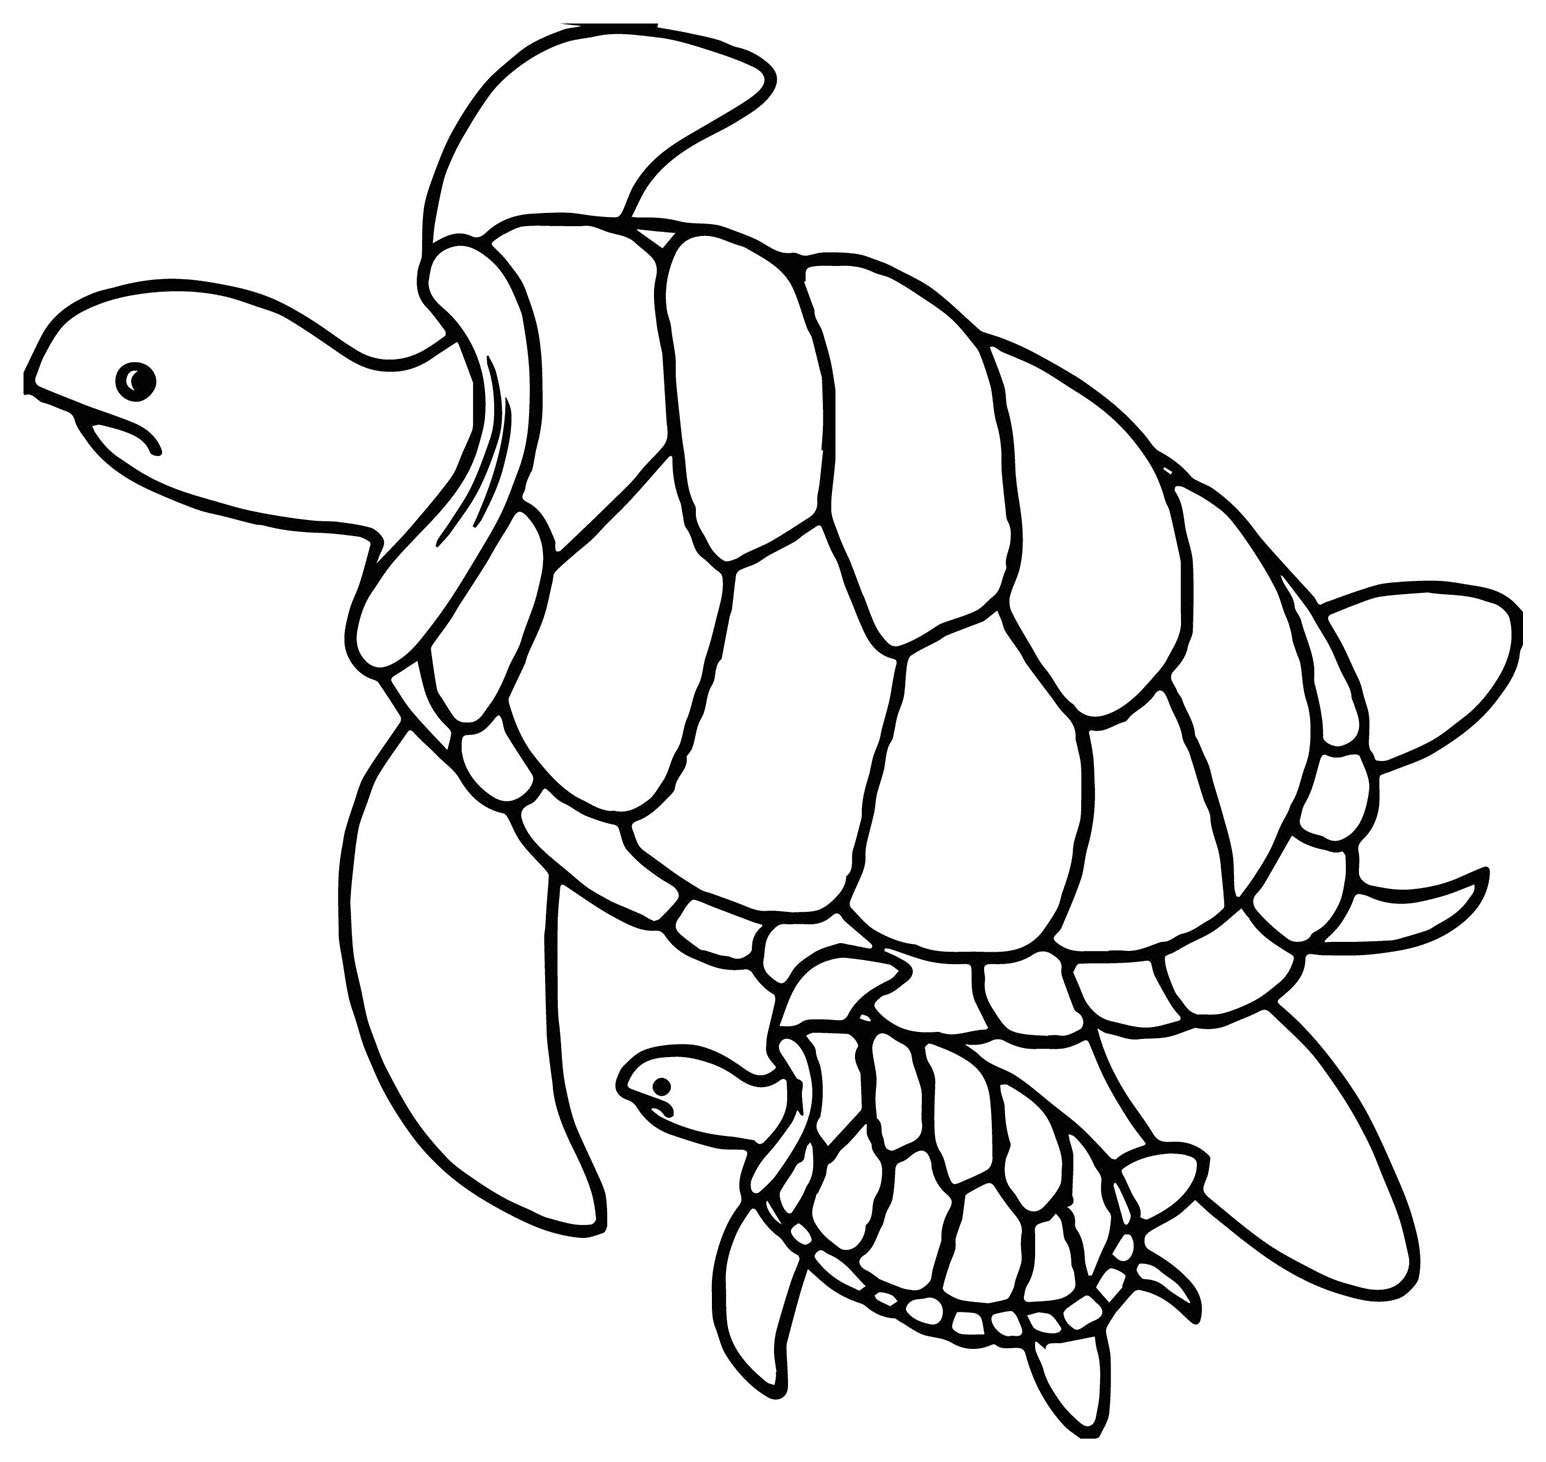 Turtle coloring pages to print - Turtles Kids Coloring Pages